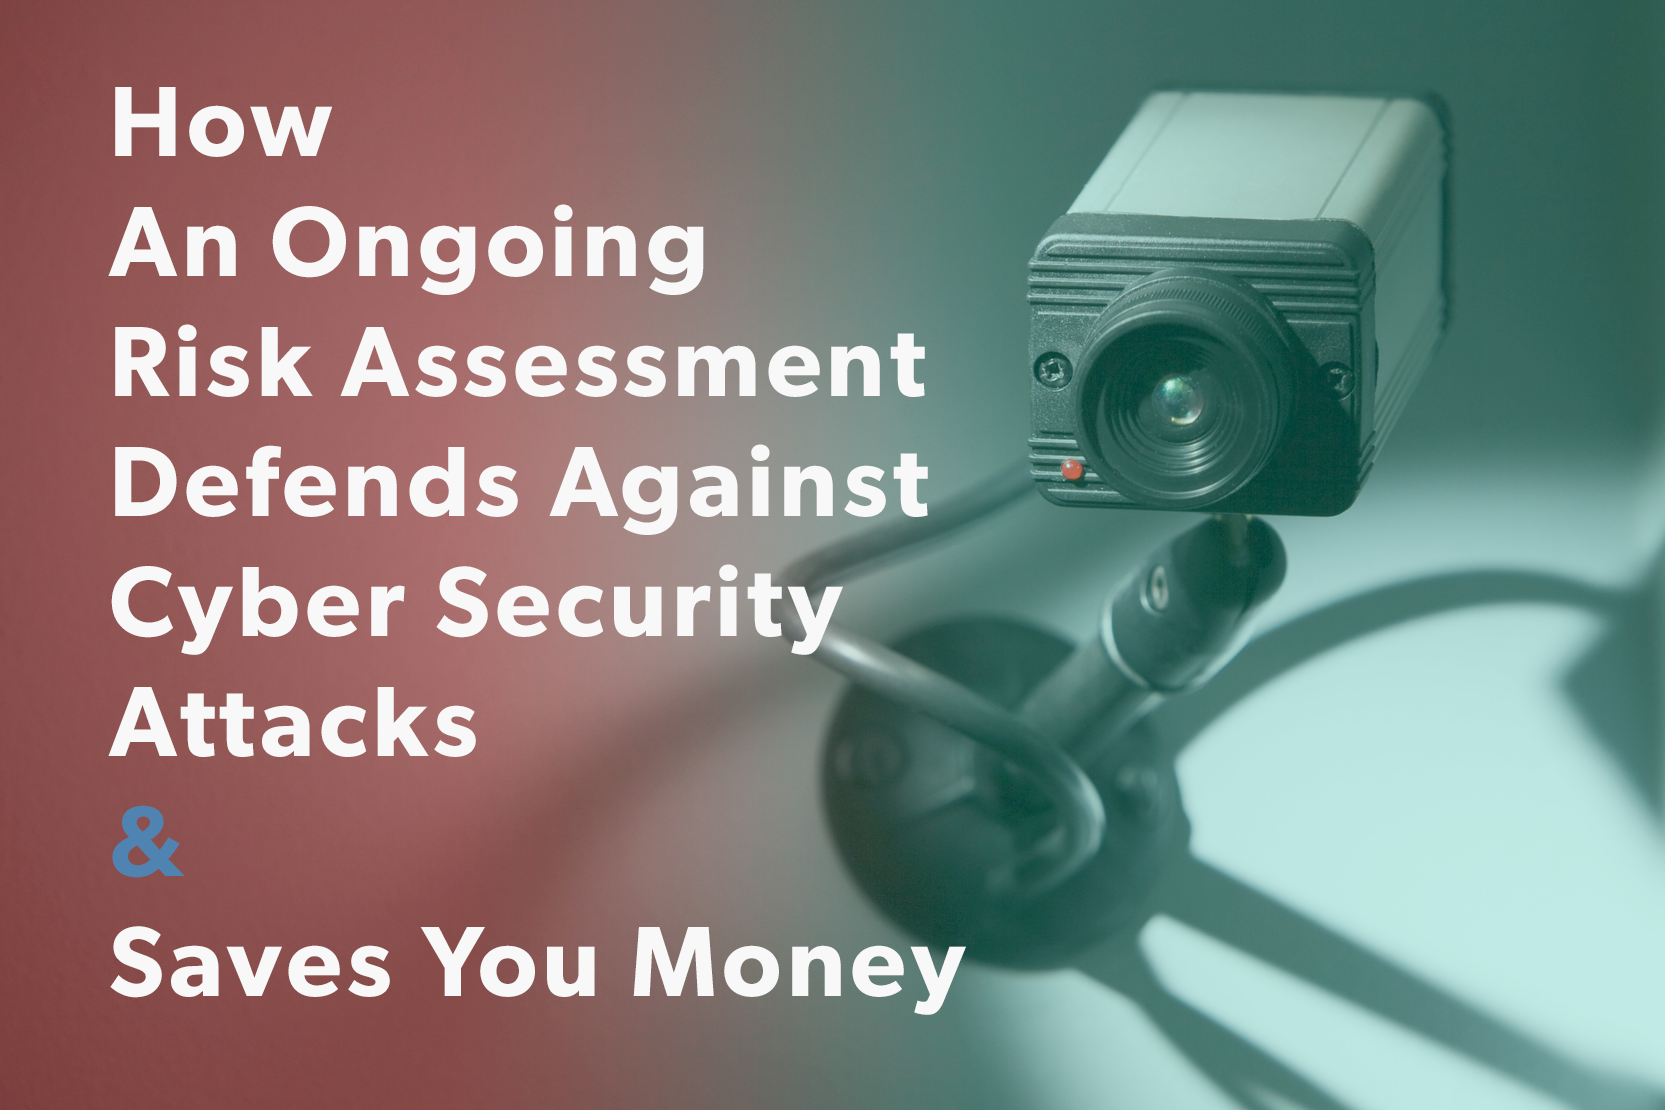 How An Ongoing Risk Assessment Defends Against Cyber Security Attacks – and Saves You Money